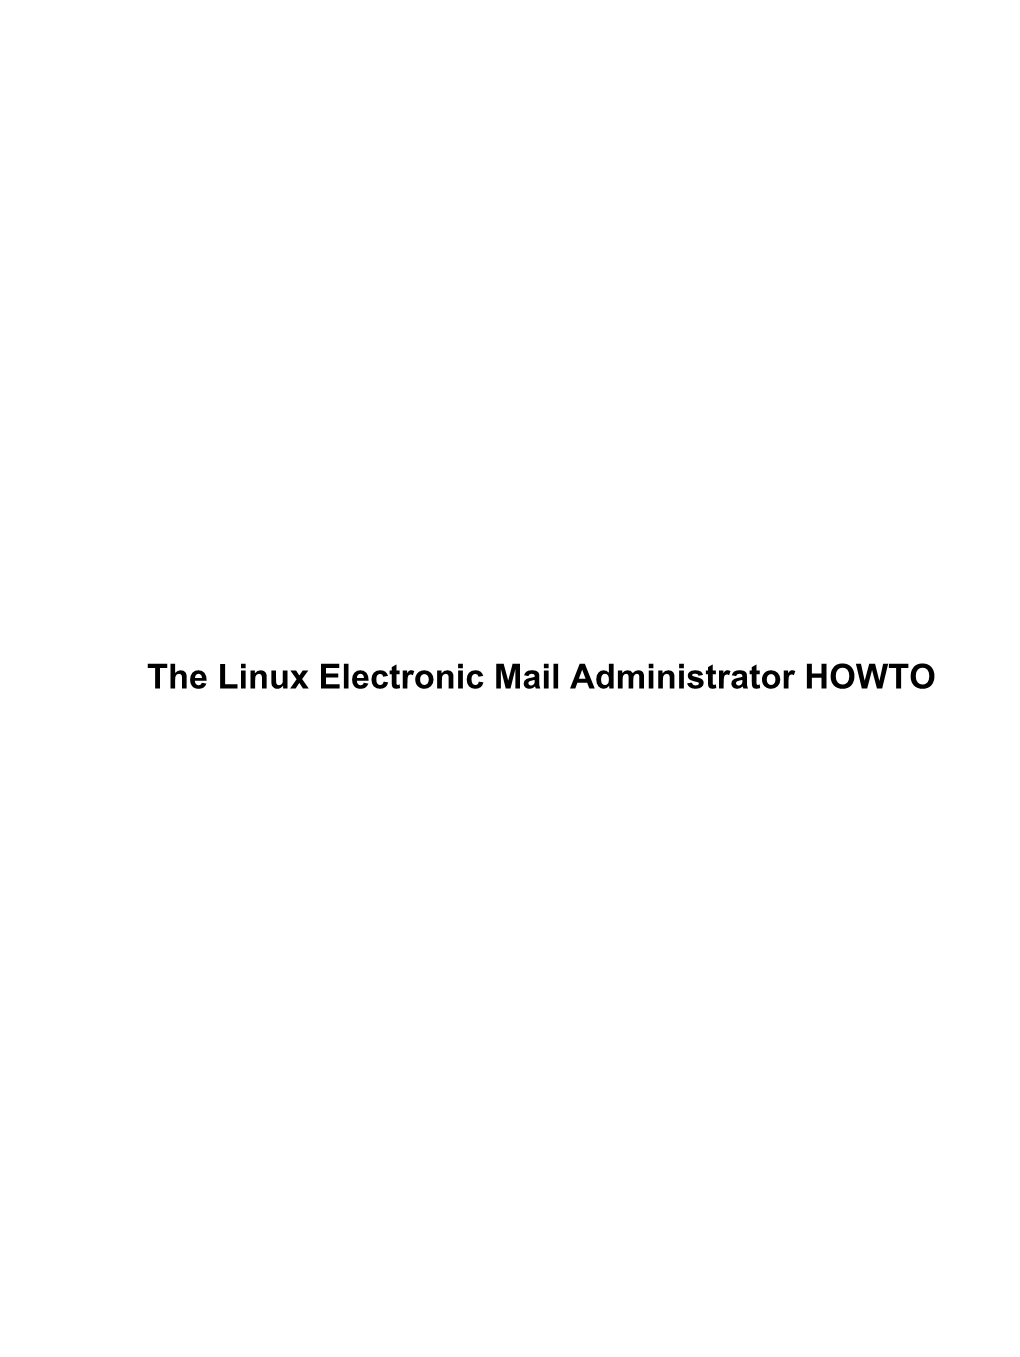 The Linux Electronic Mail Administrator HOWTO the Linux Electronic Mail Administrator HOWTO